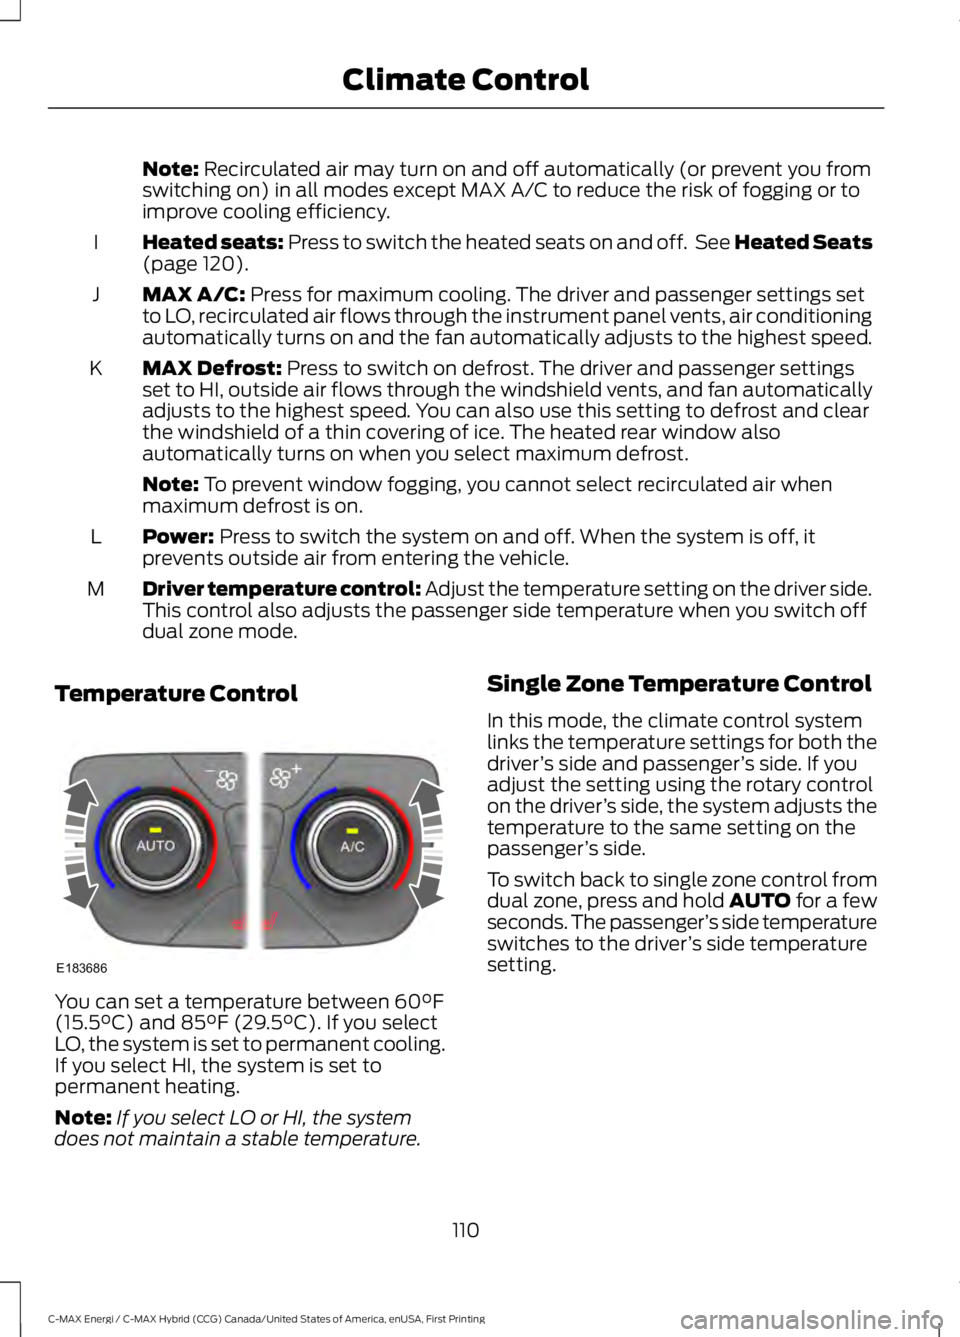 FORD C MAX ENERGI 2017  Owners Manual Note: Recirculated air may turn on and off automatically (or prevent you fromswitching on) in all modes except MAX A/C to reduce the risk of fogging or toimprove cooling efficiency.
Heated seats: Pres